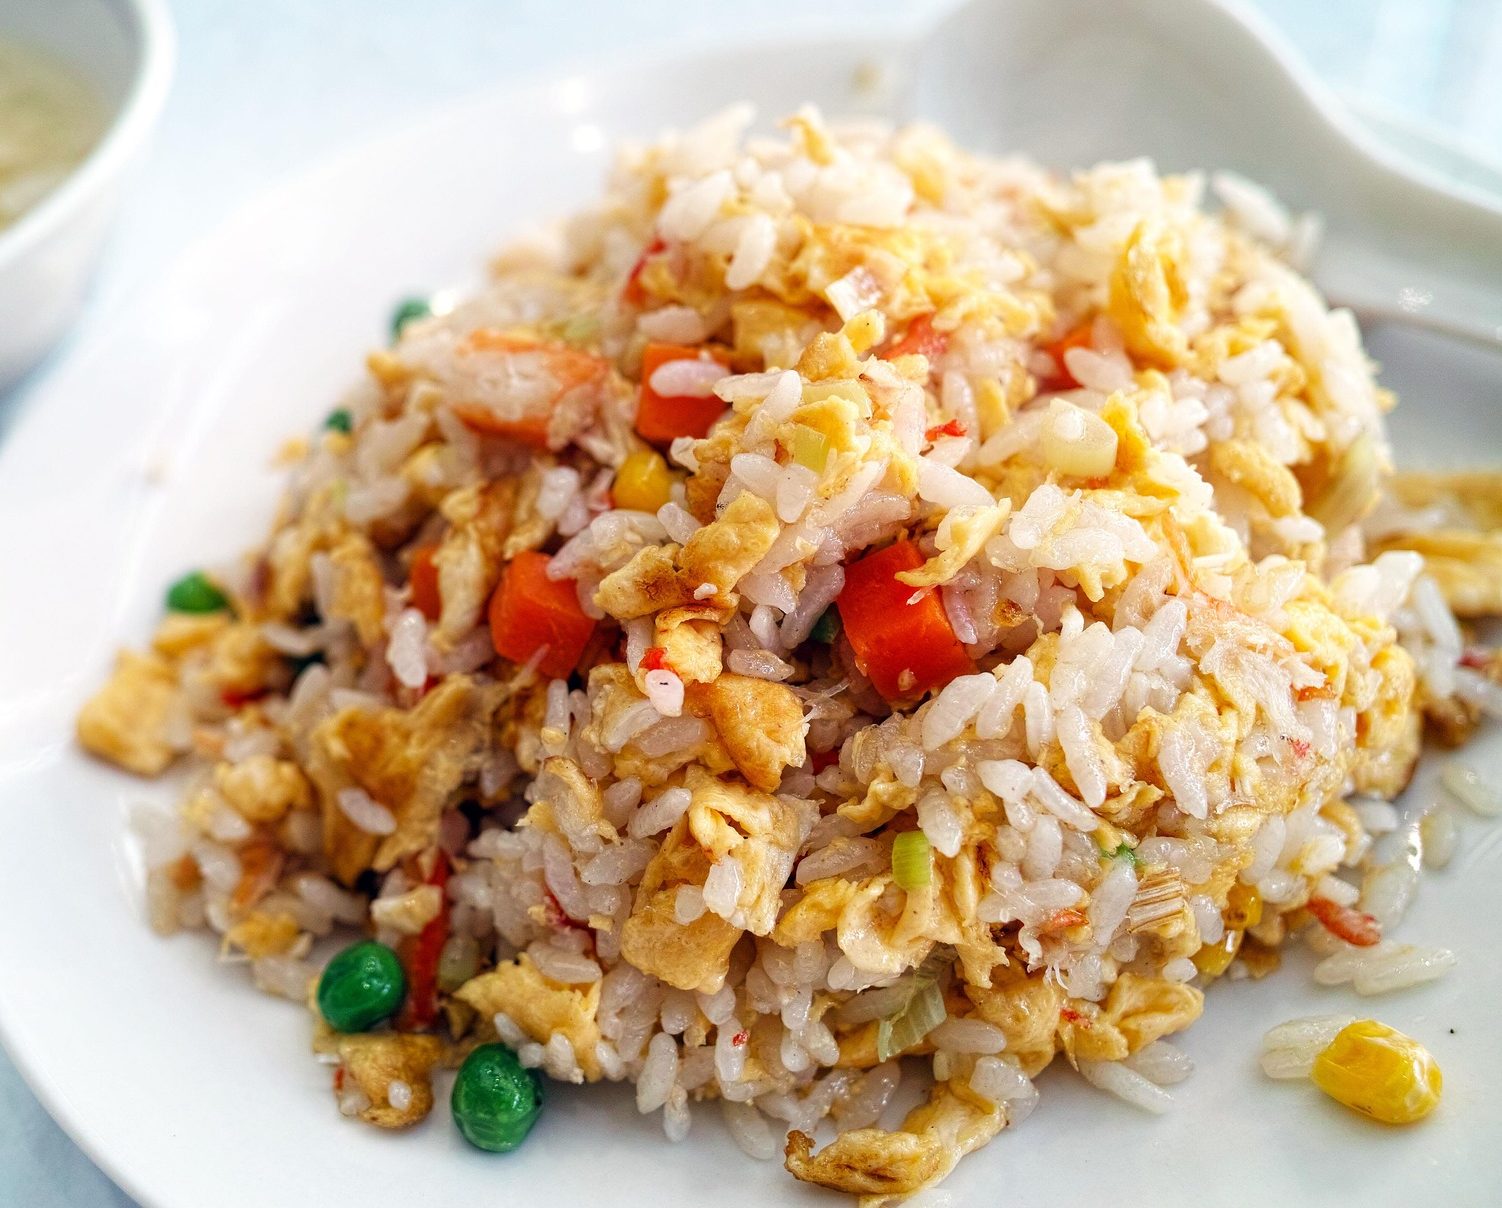 This Japanese Fried Rice Takes Just 25 Minutes to Prepare